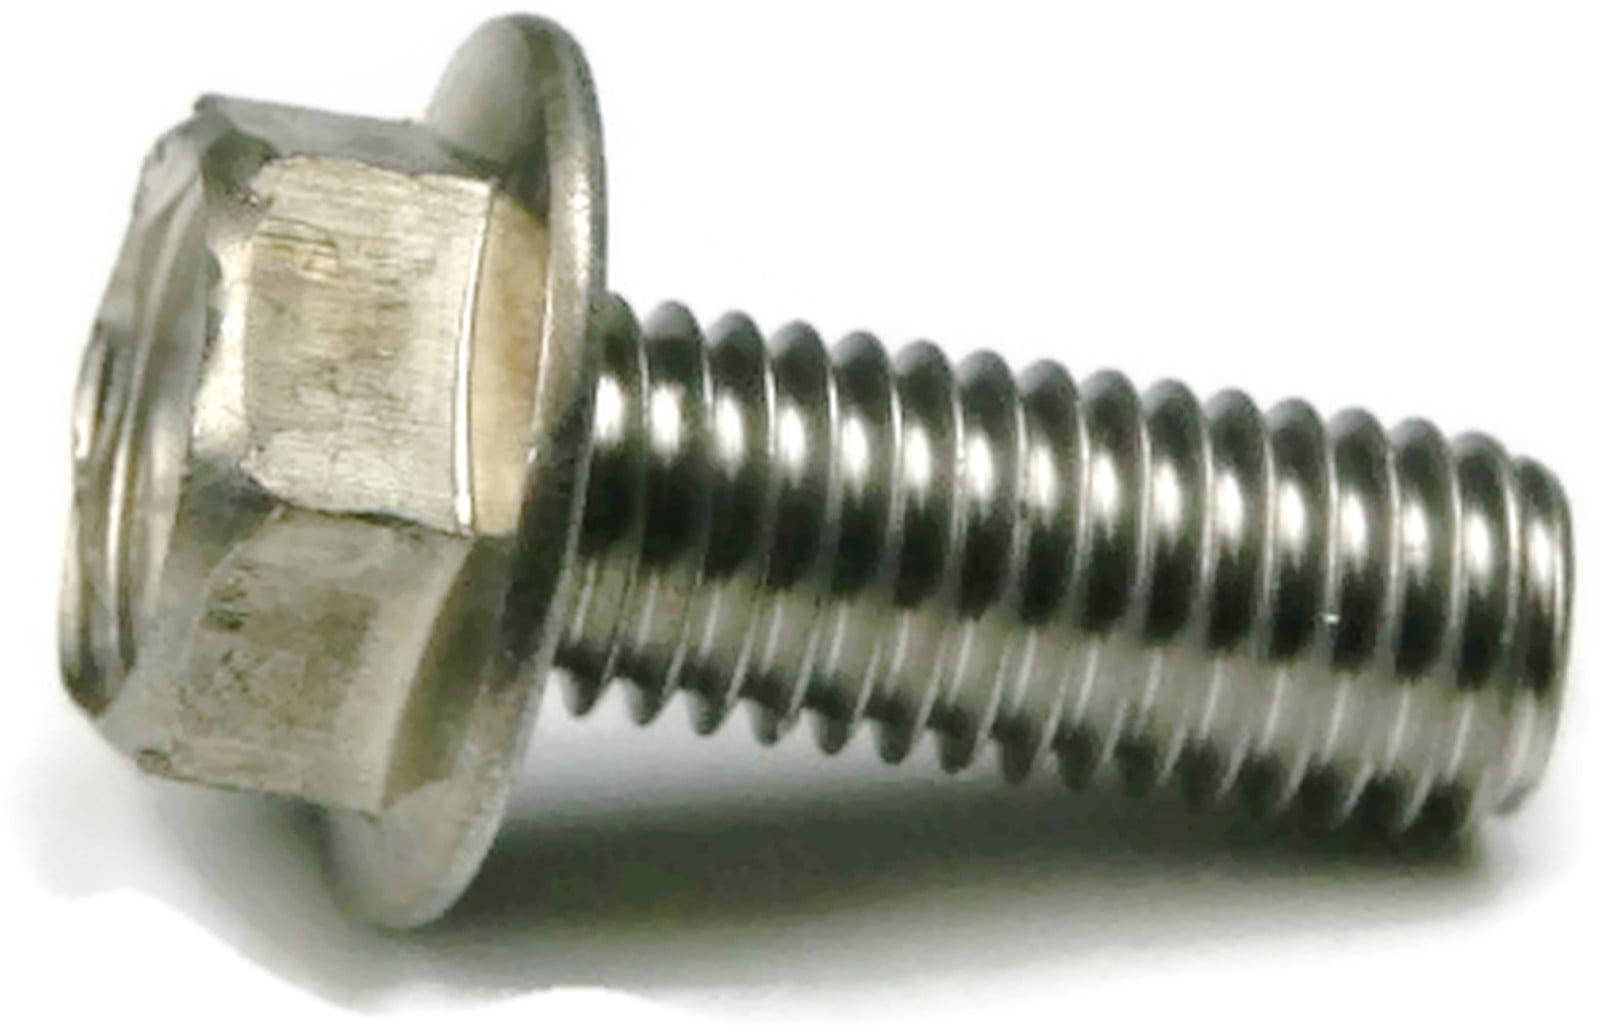 Qty 1000 1/4"-20 x 1/2" Stainless Steel Hex Cap Serrated Flange Bolt FT UNC 